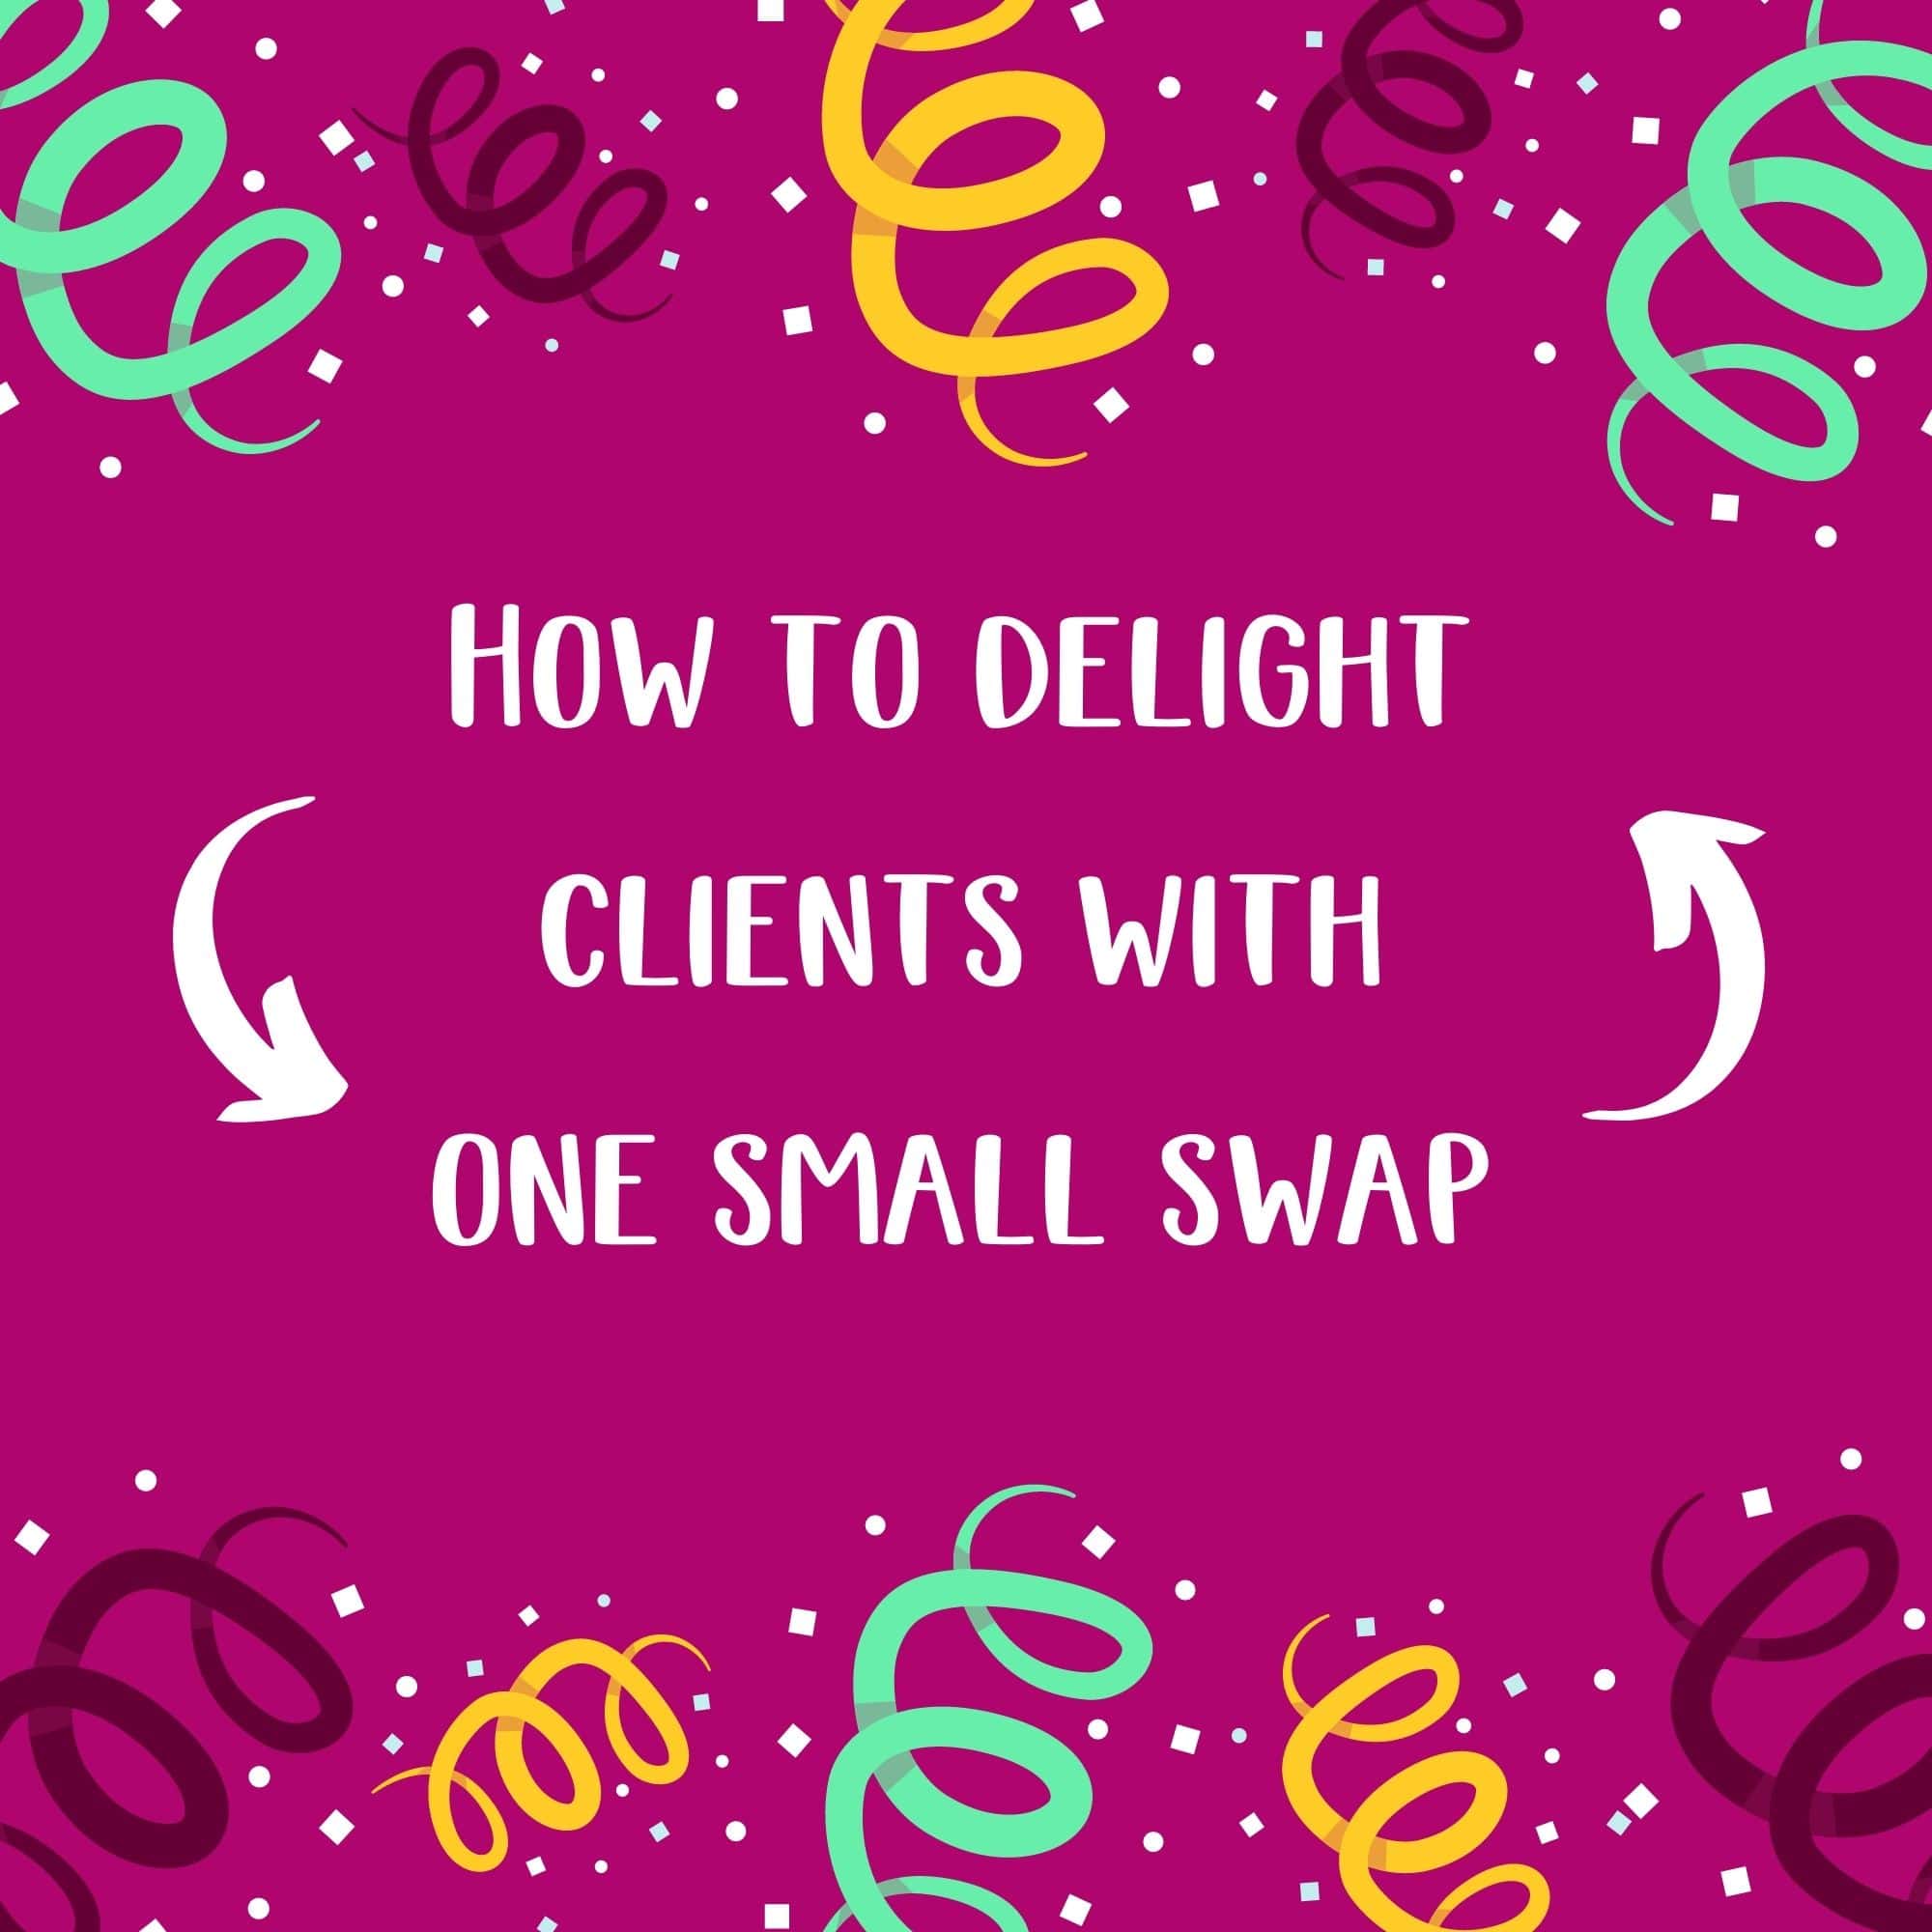 How to delight clients with one small swap